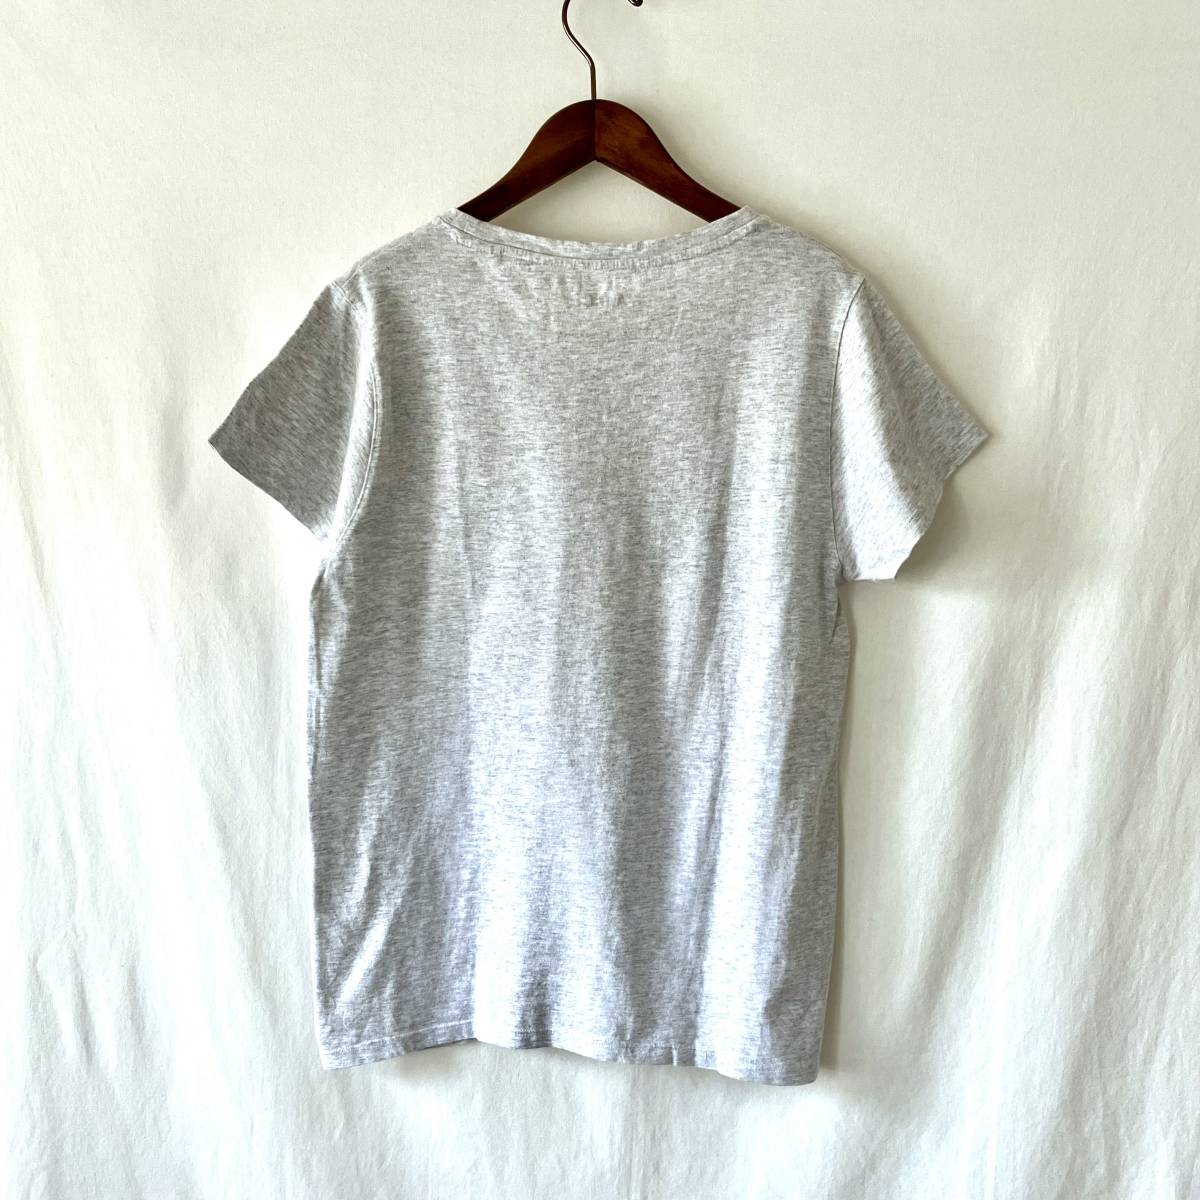 # perhaps unused # regular price 11,000 # A.P.C US collection # US STAR T-shirt S # /